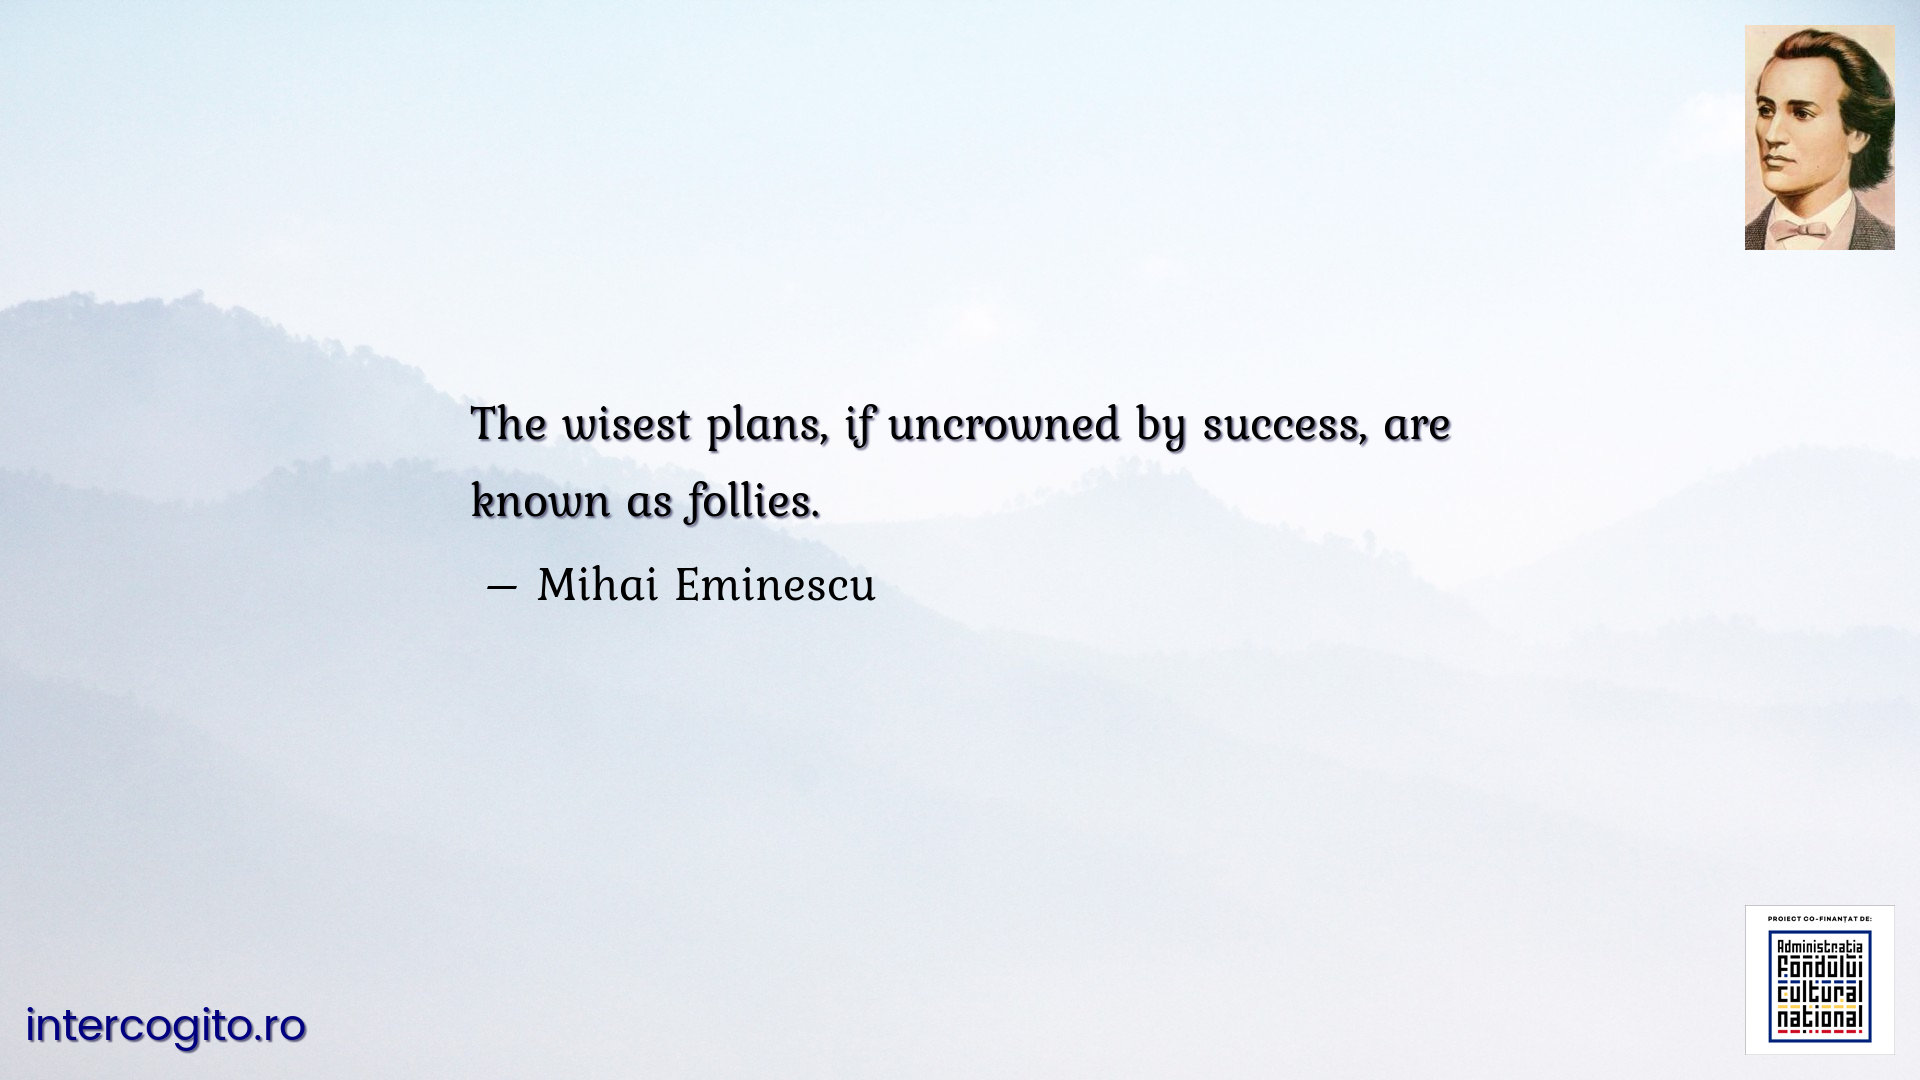 The wisest plans, if uncrowned by success, are known as follies.